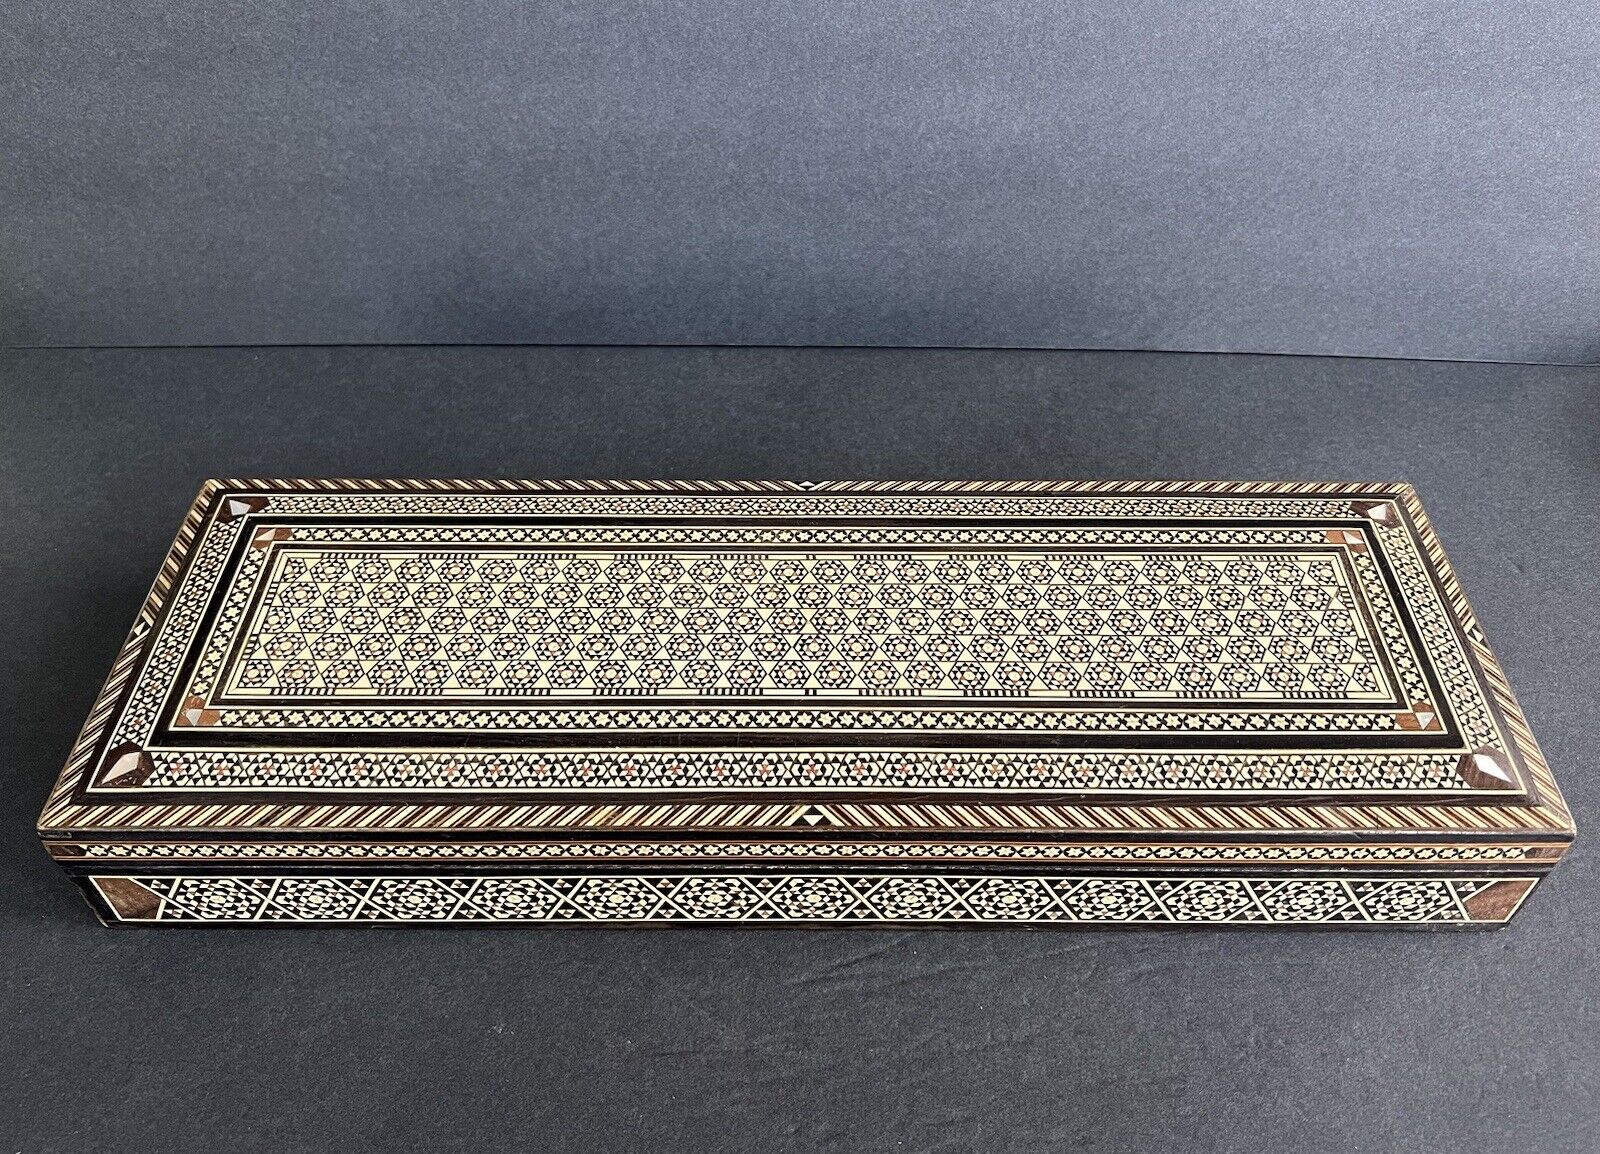 Rare vintage 16.75” rectangular Moroccan inlaid decorative box with compartments